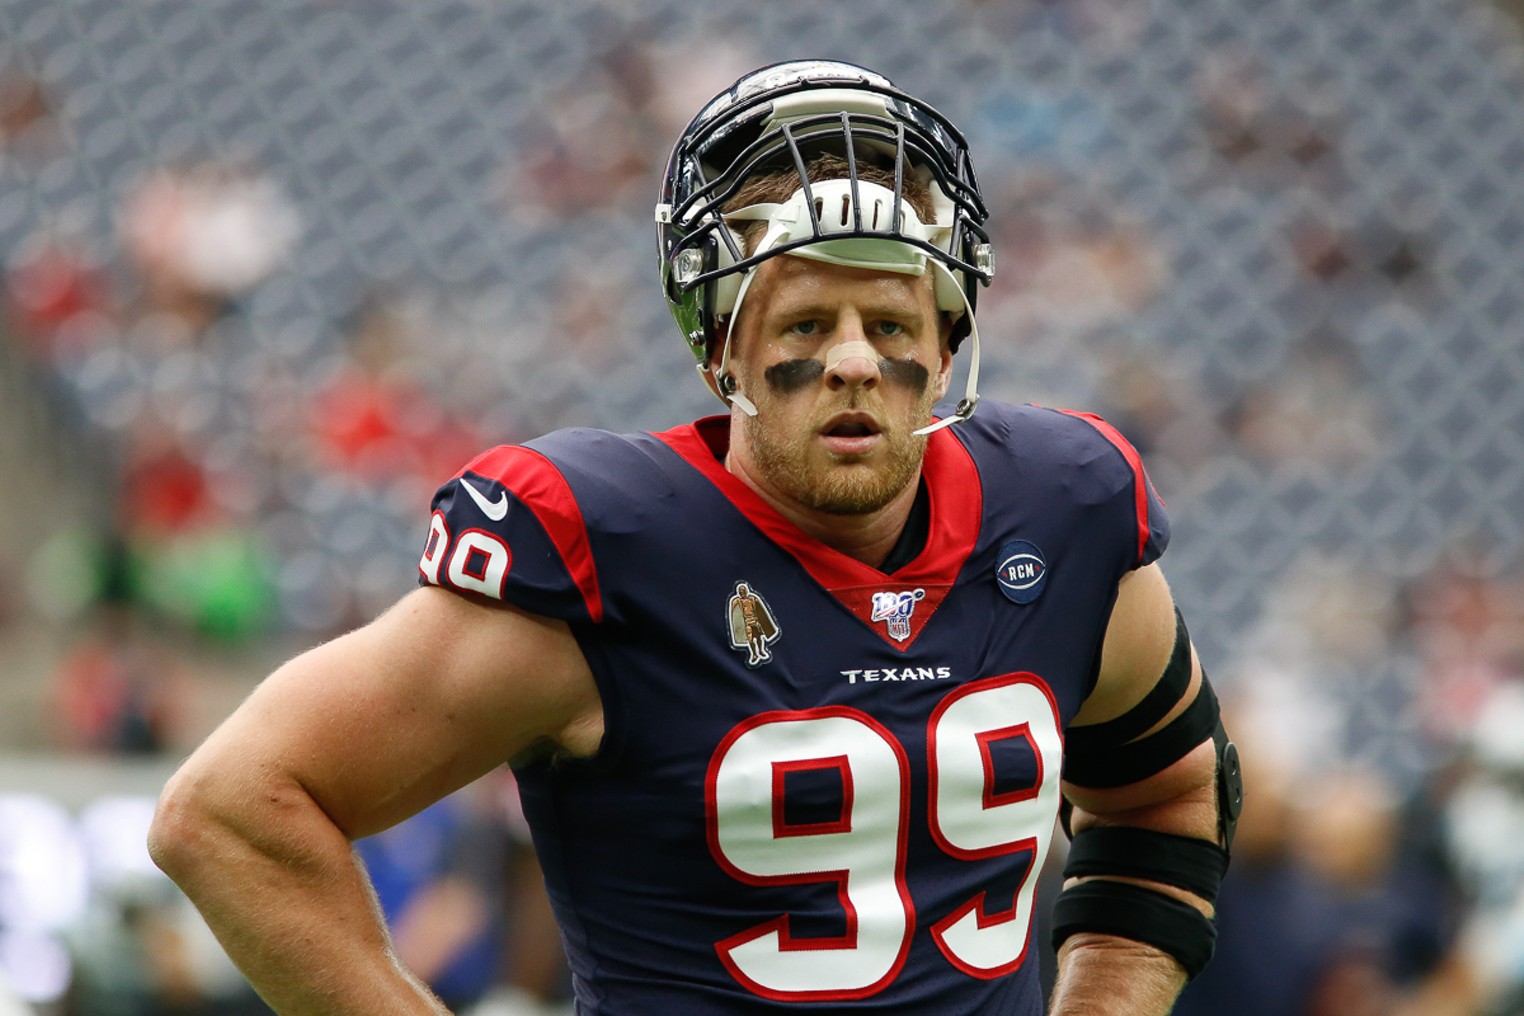 Bad news for J.J. Watt: He may not be able to wear No. 99 in Arizona